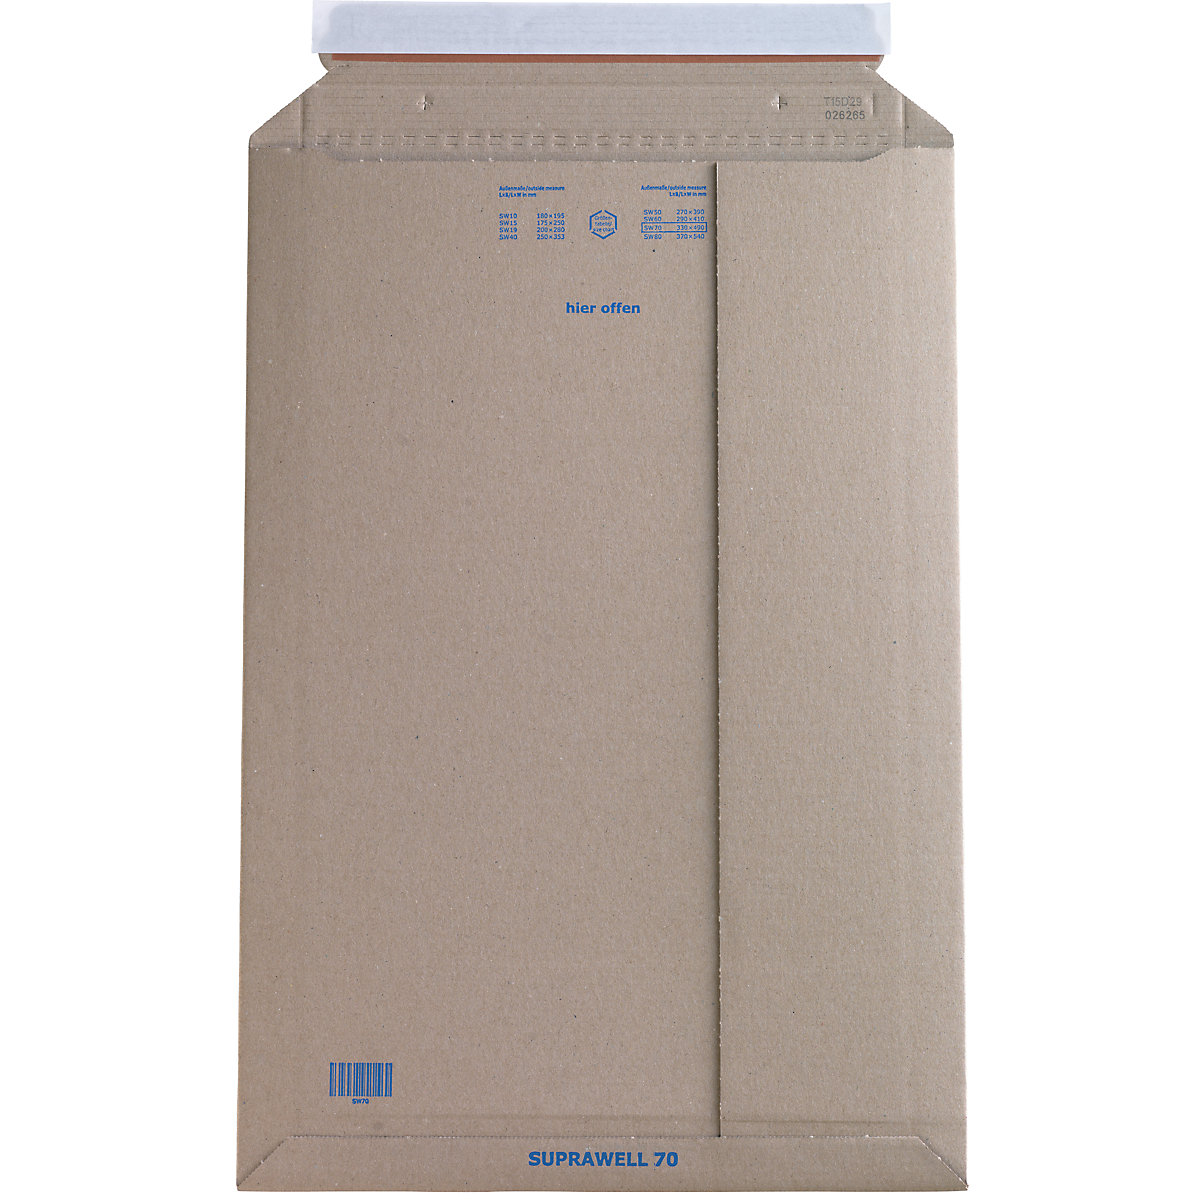 Dispatch bags, filling height up to 25 mm, LxW 490 x 330 mm-2